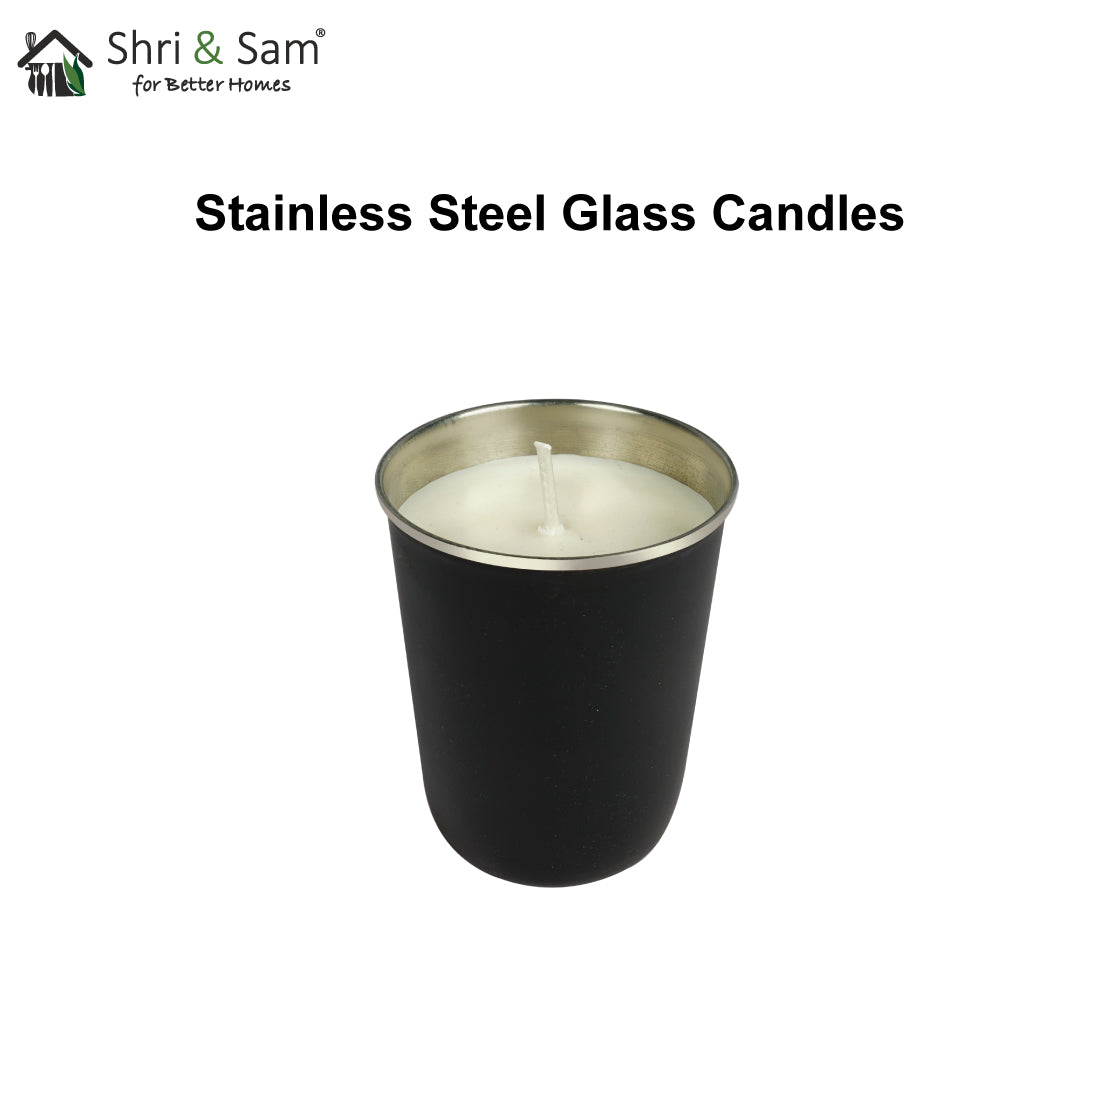 Stainless Steel Single Wick Glass Candle